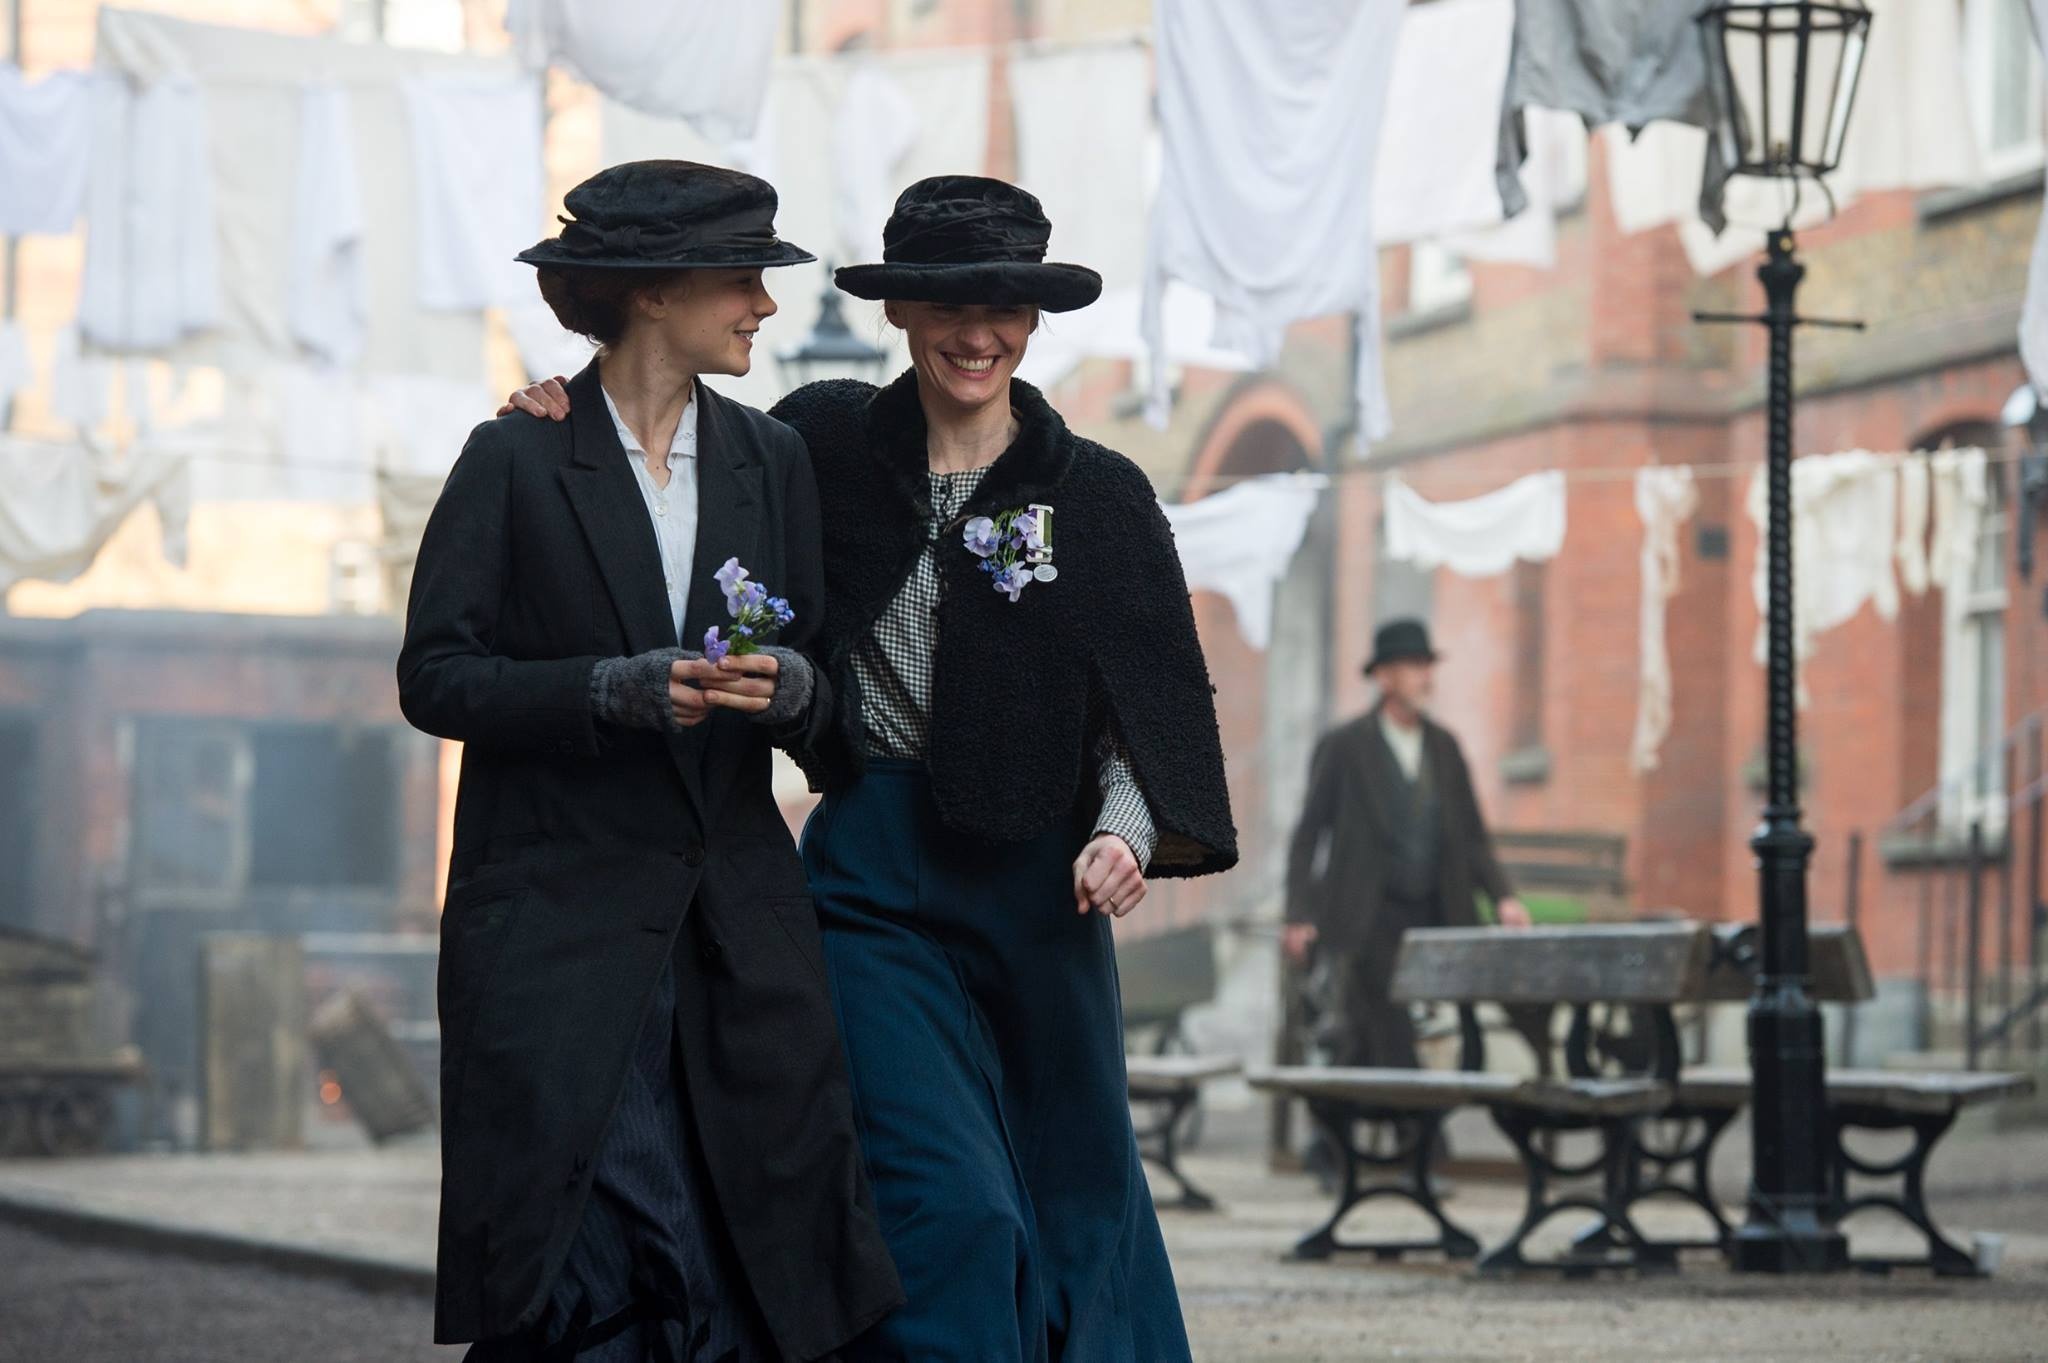 Suffragette movie, Powerful film review, Impactful storytelling, Important social commentary, 2050x1370 HD Desktop